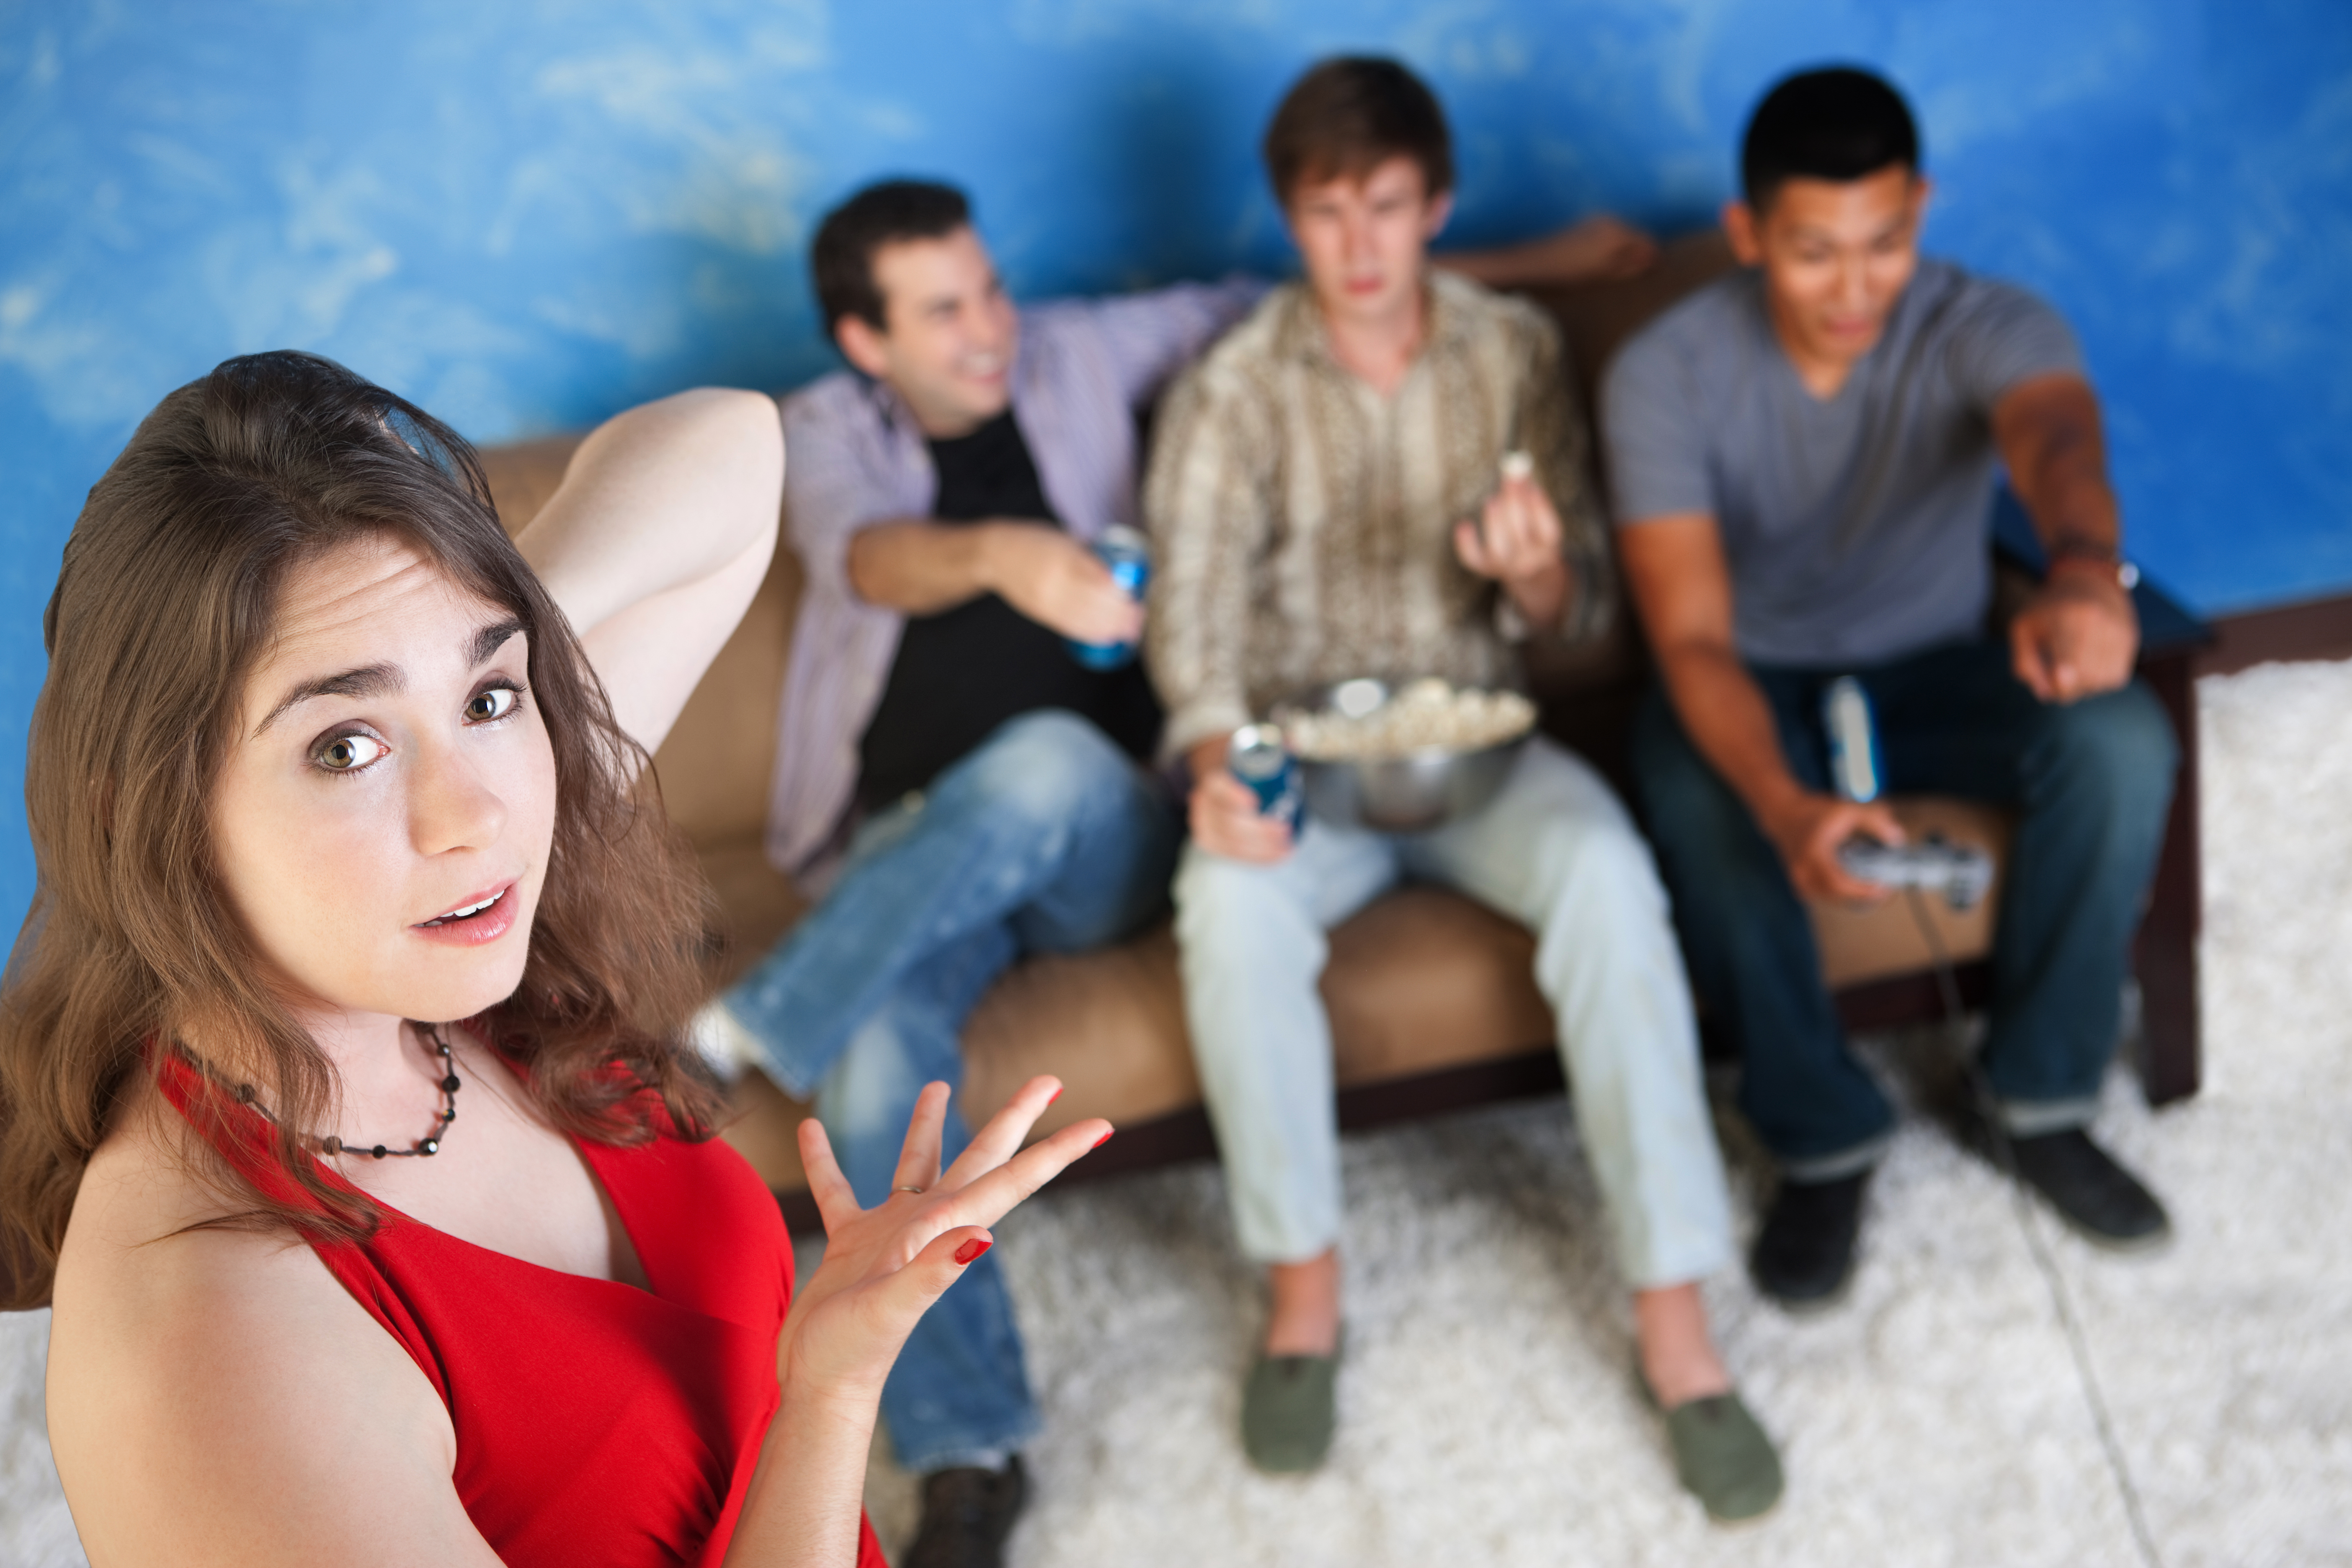 Annoyed young Caucasian woman with three men playing video games